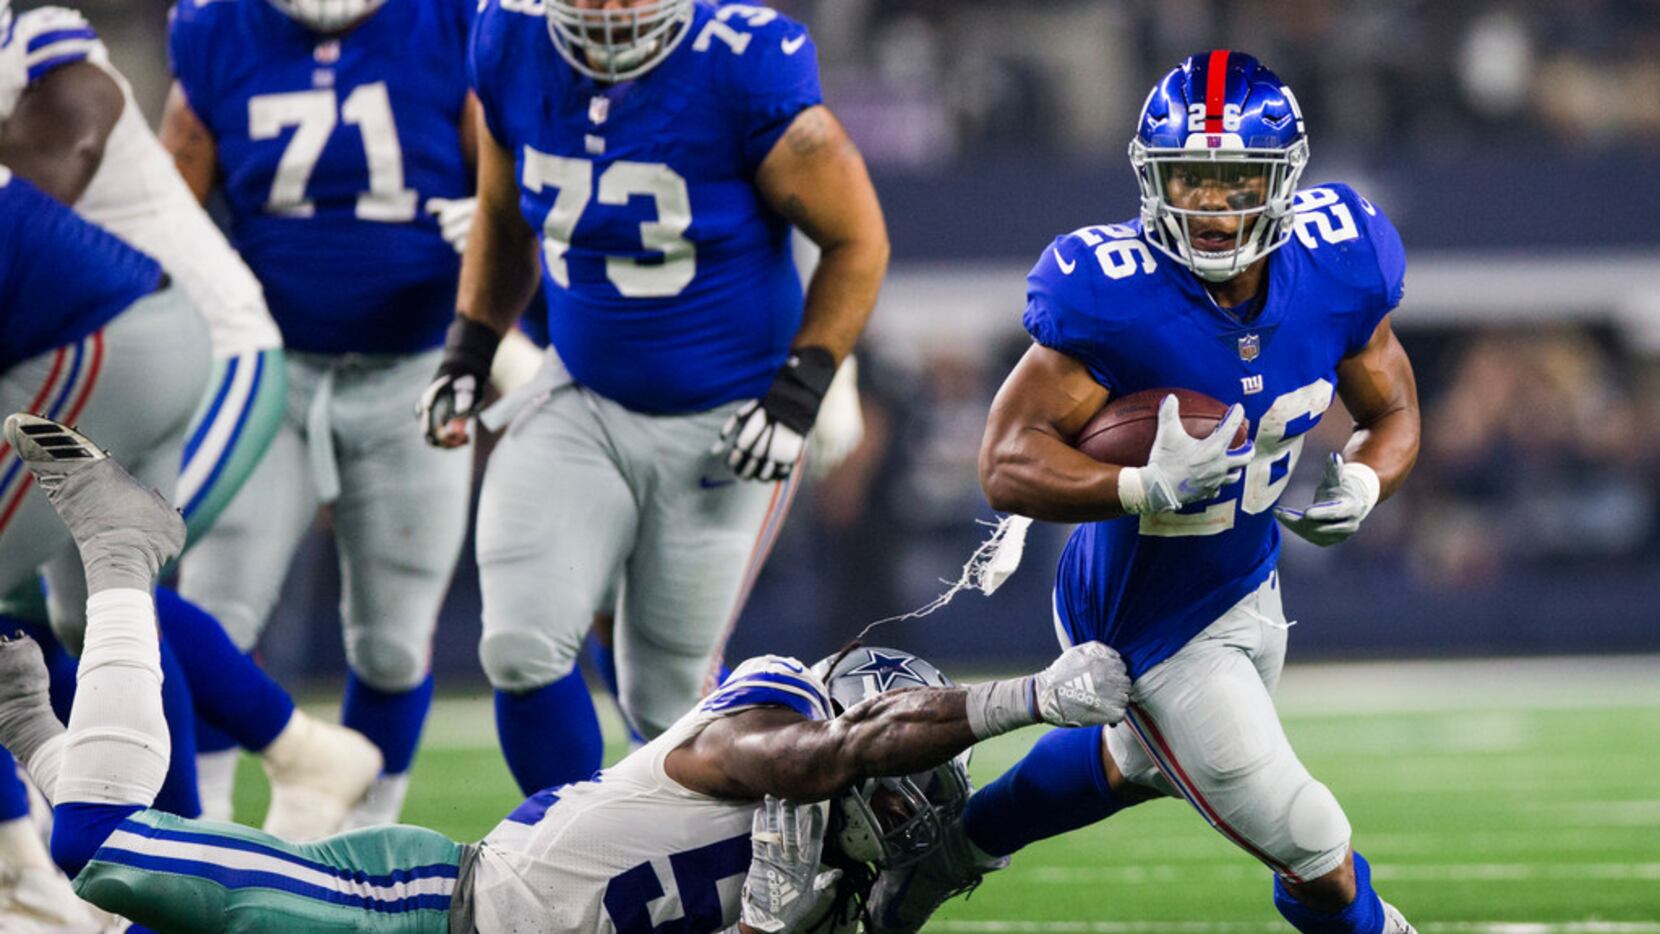 Saquon Barkley, Giants settle on 1-year deal worth up to $11